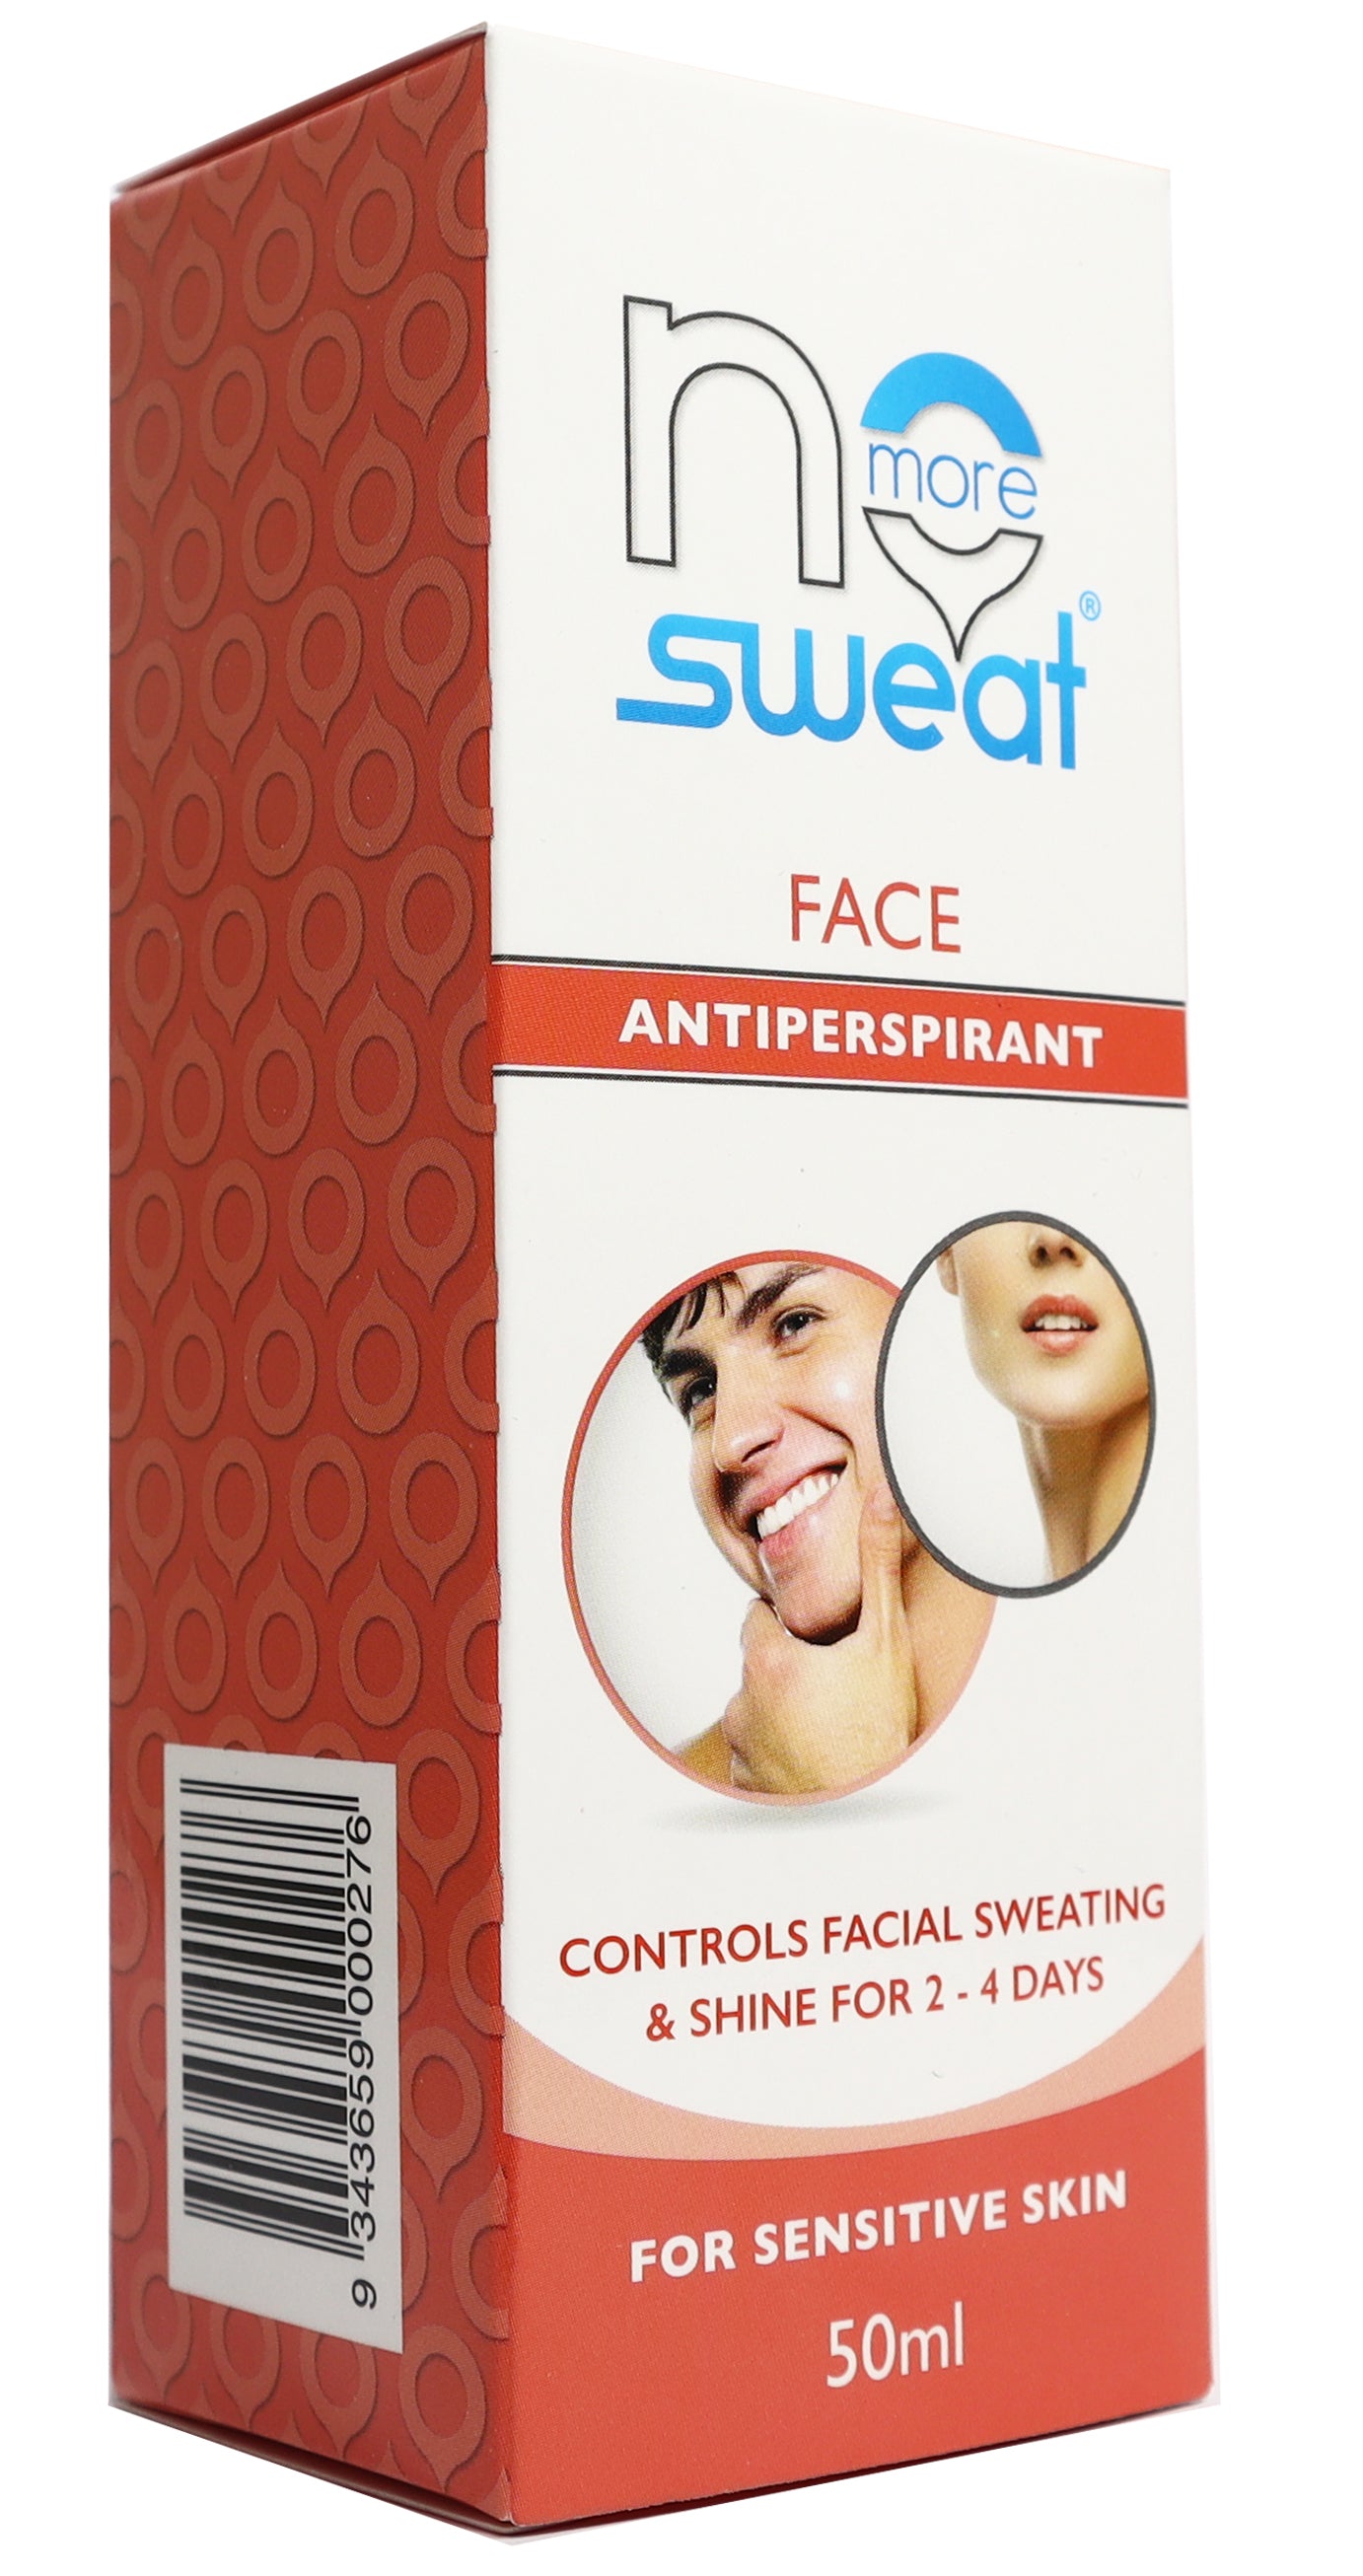 NMS Face – Clinical Antiperspirant